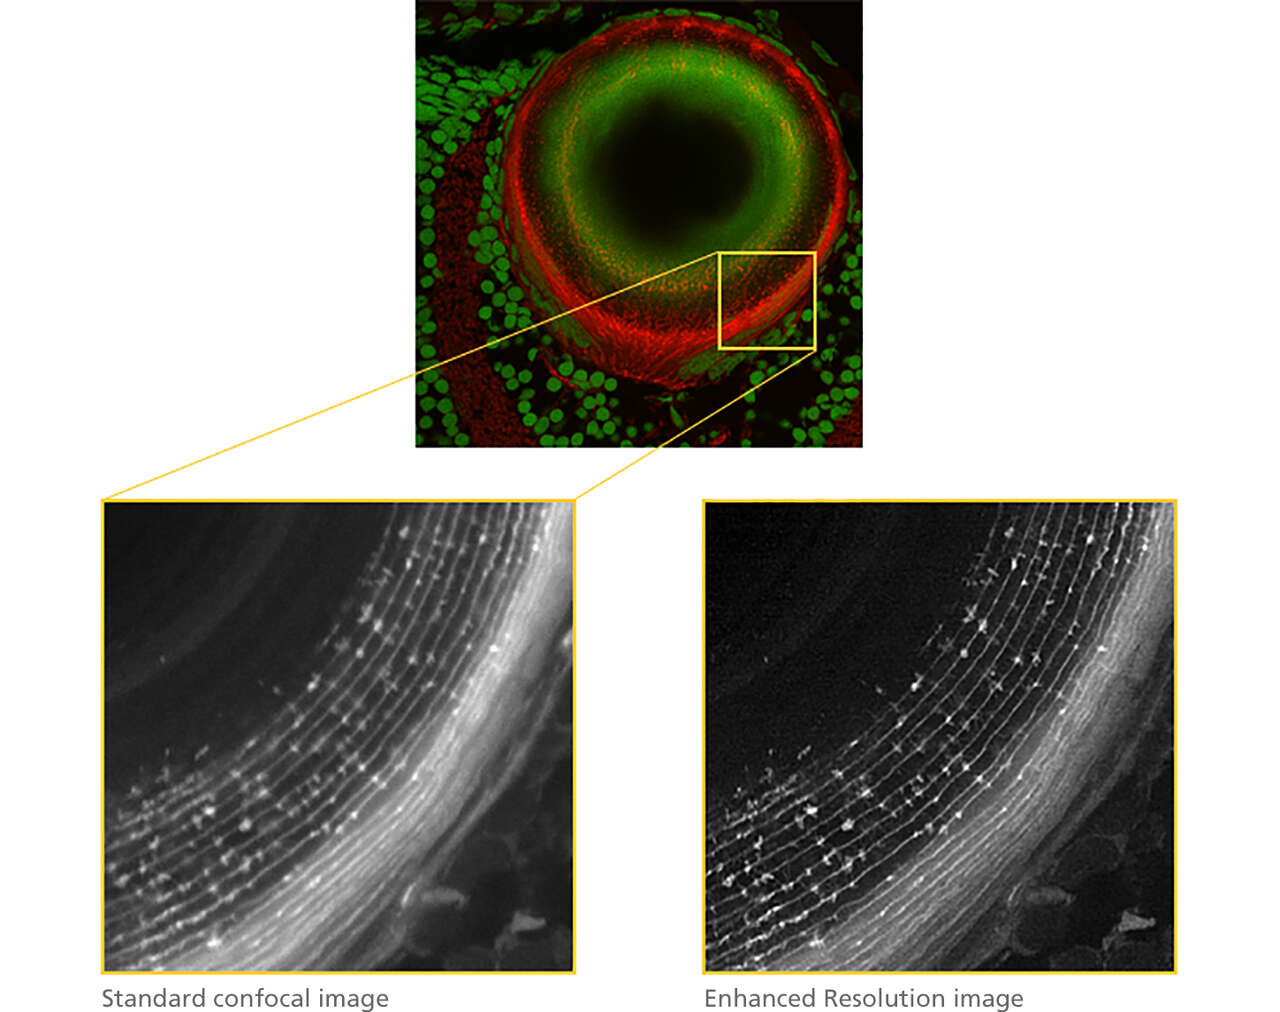 NIS-Elements Confocal | NIS-Elements | Software | Microscope